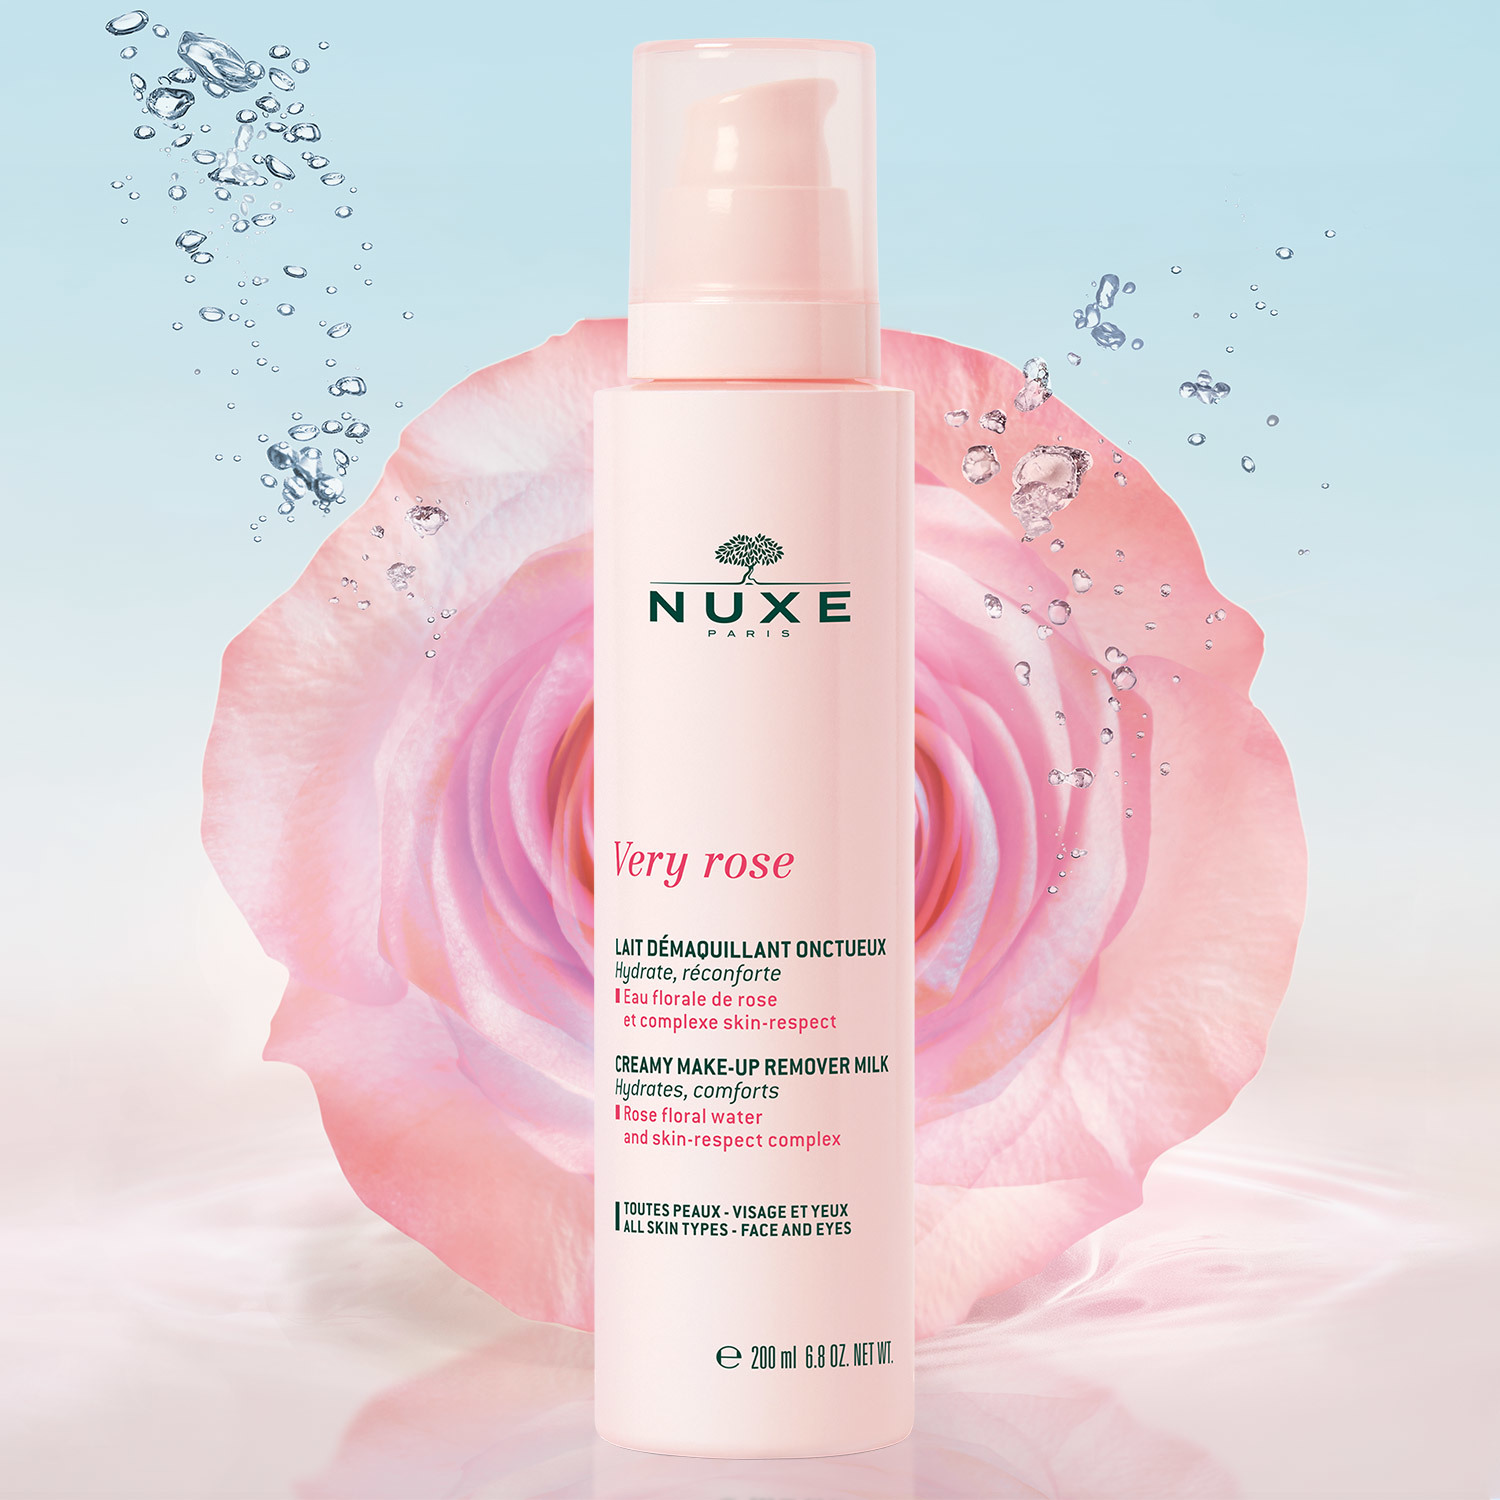 NUXE - Very Rose - Lait Demaquillant Onctueux, 200ml